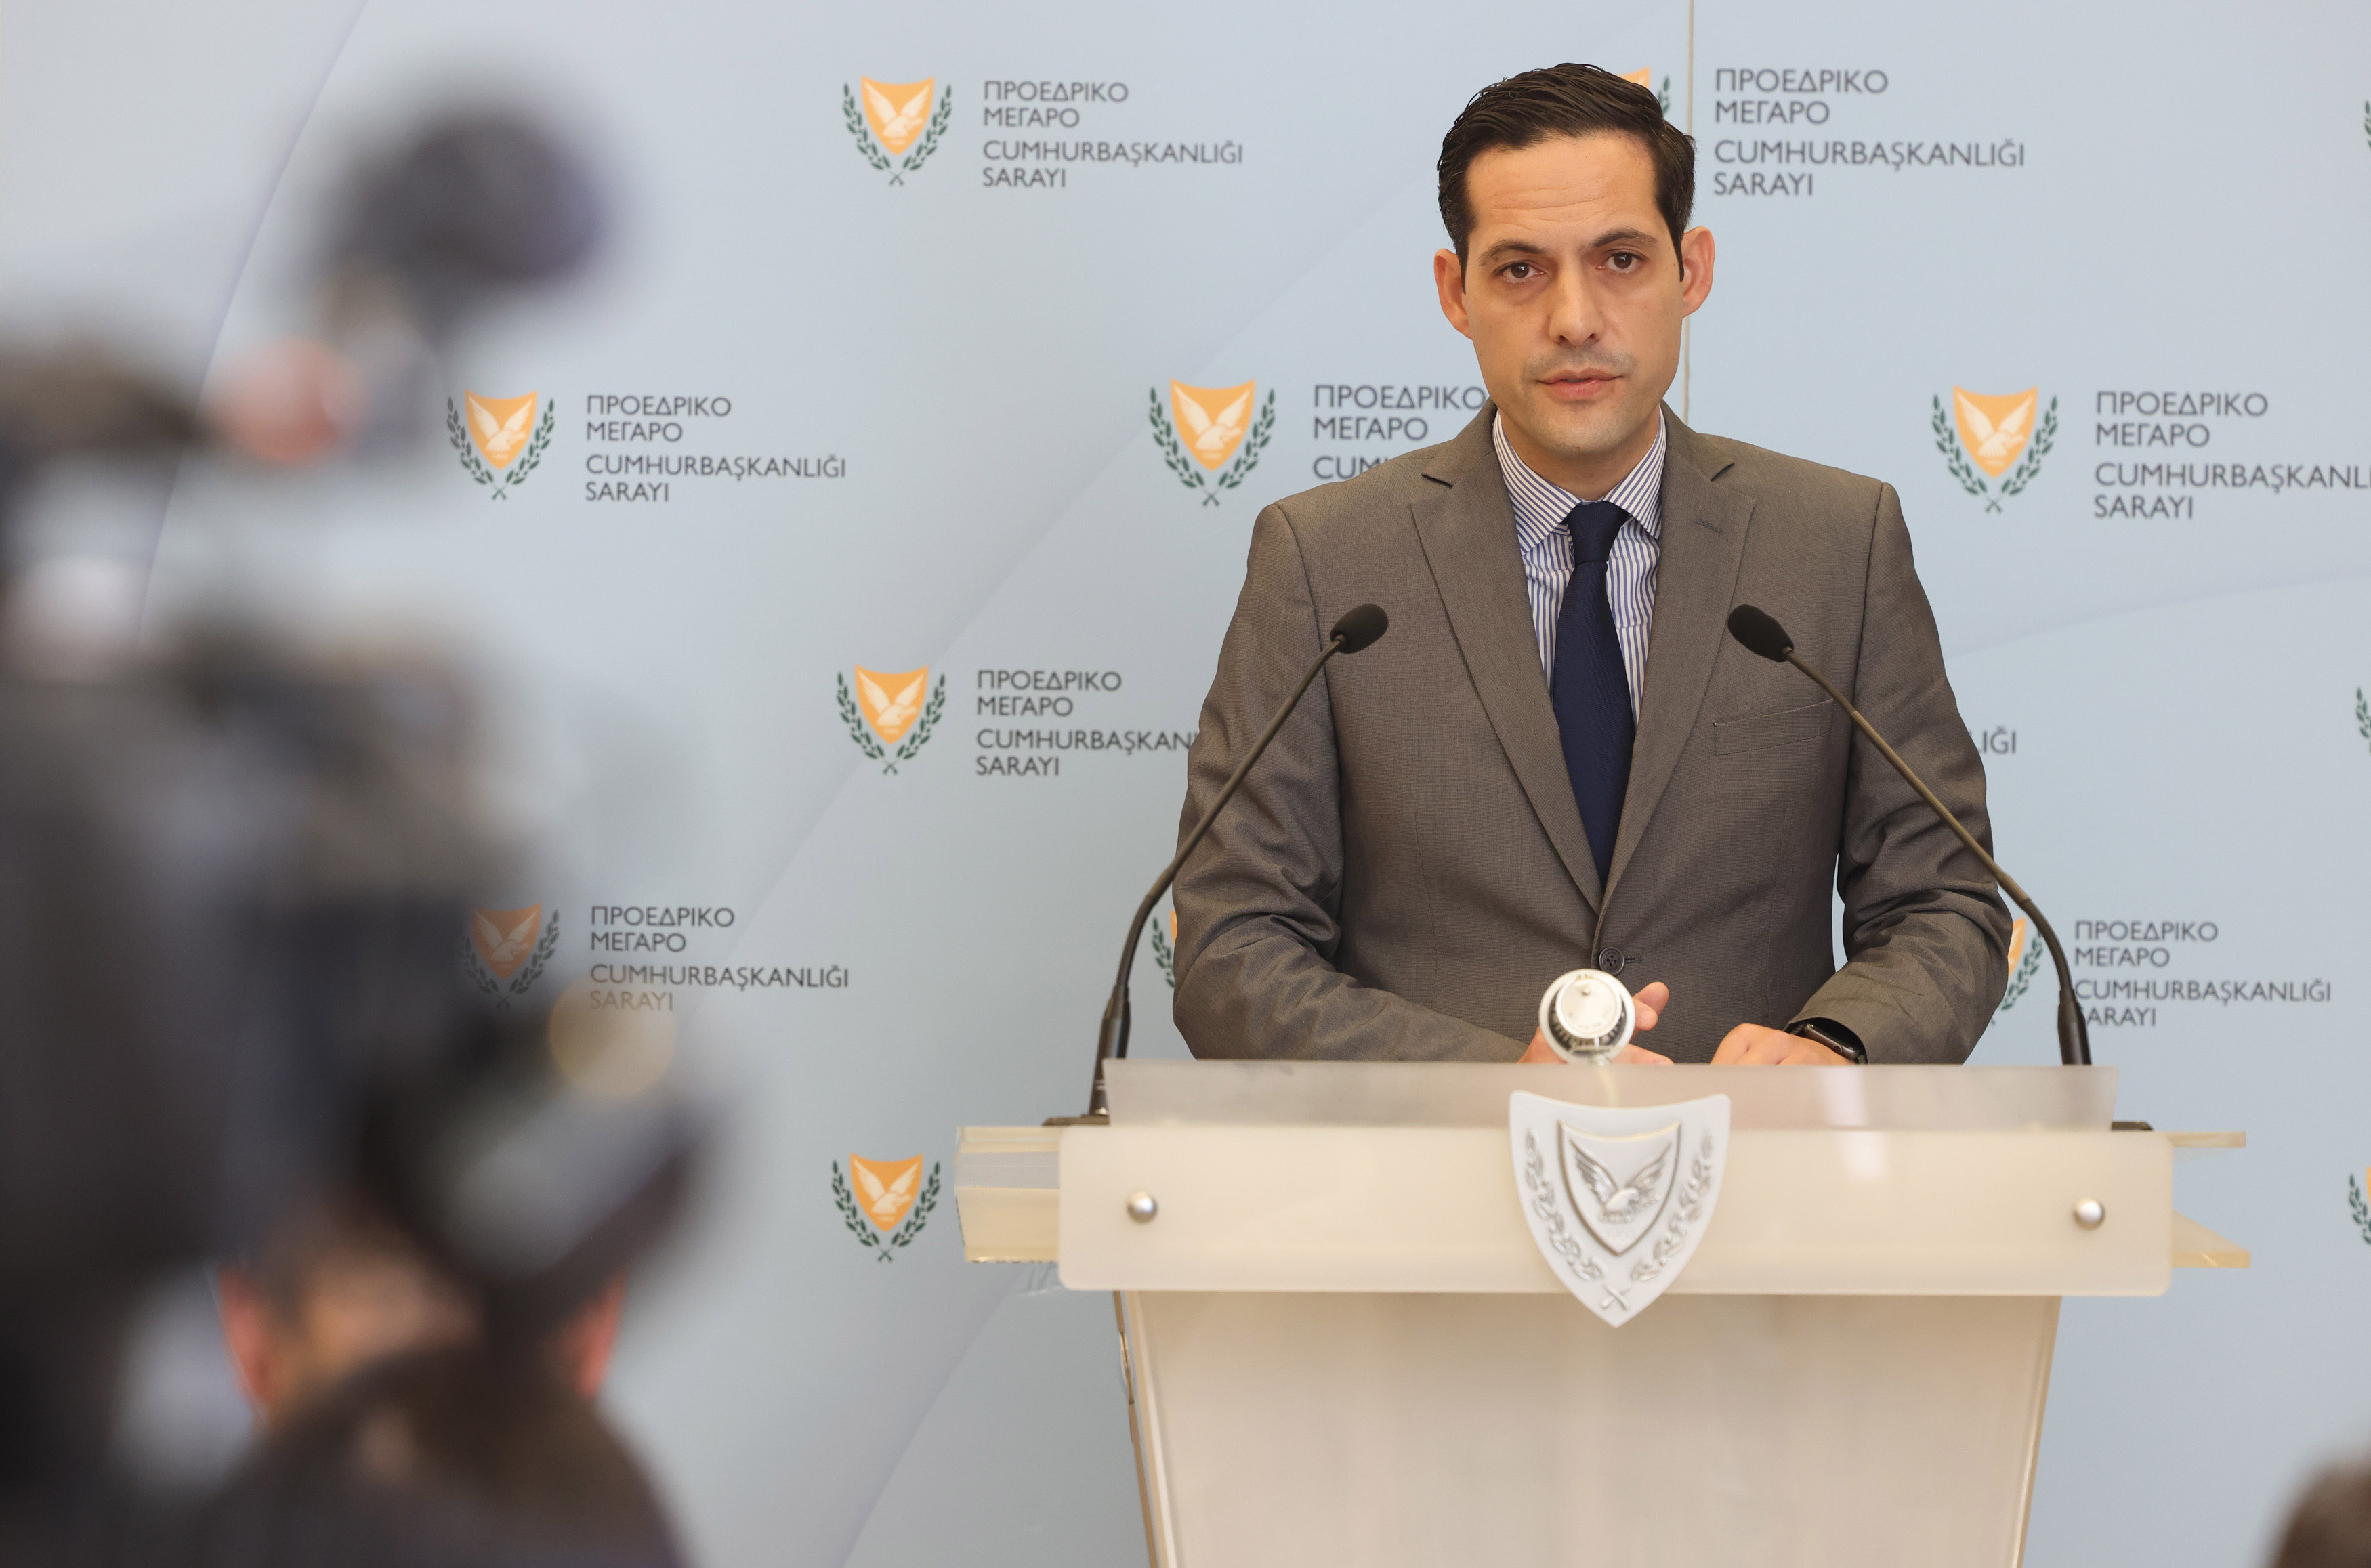 &#8216;No greater concern than resolving the Cyprus issue&#8217;